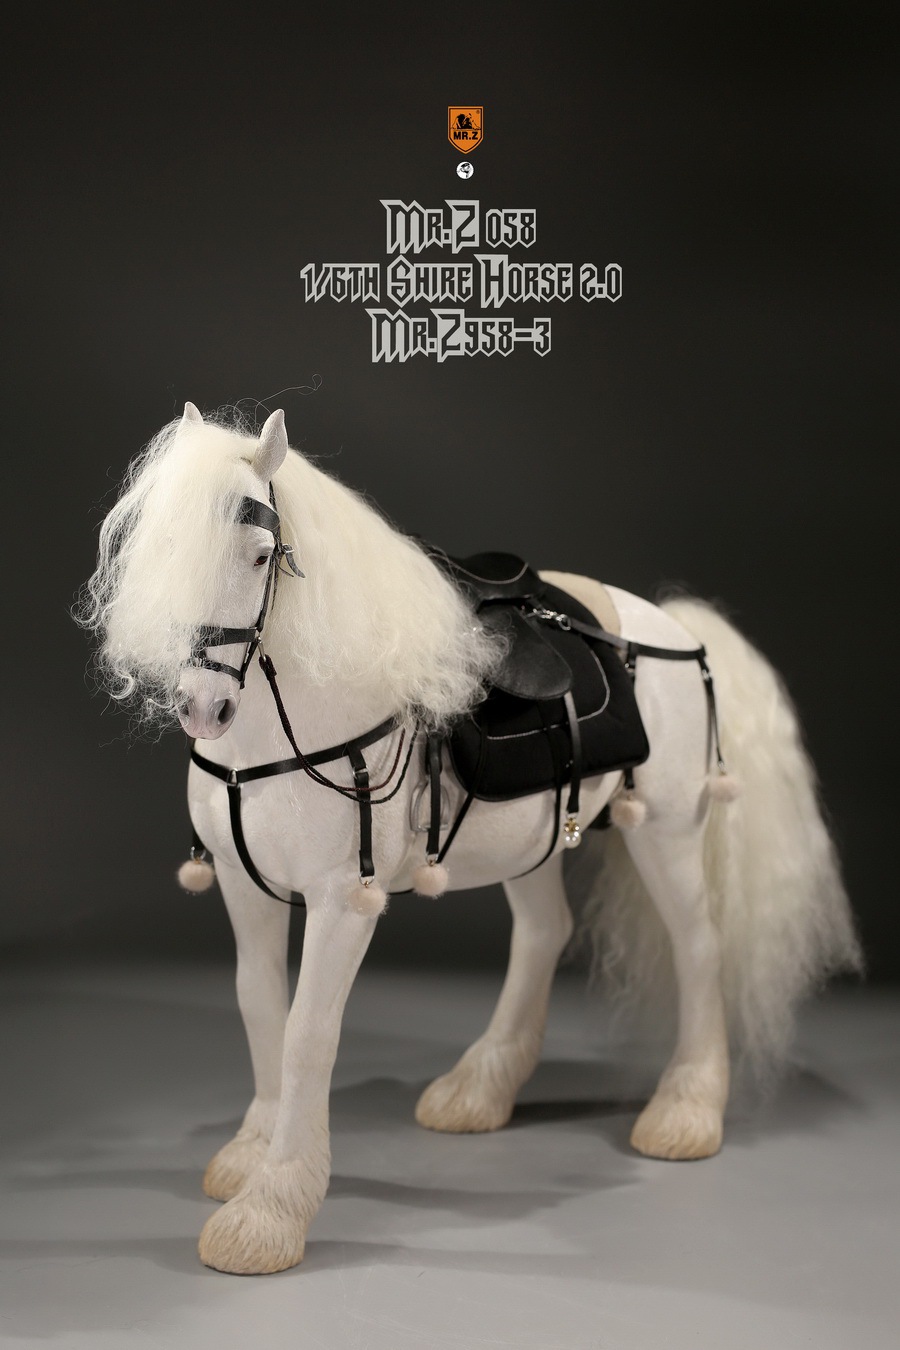 Mr - NEW PRODUCT: MR. Z: 58th round-Shire Horse 2.0 version full set of 5 colors  08575310